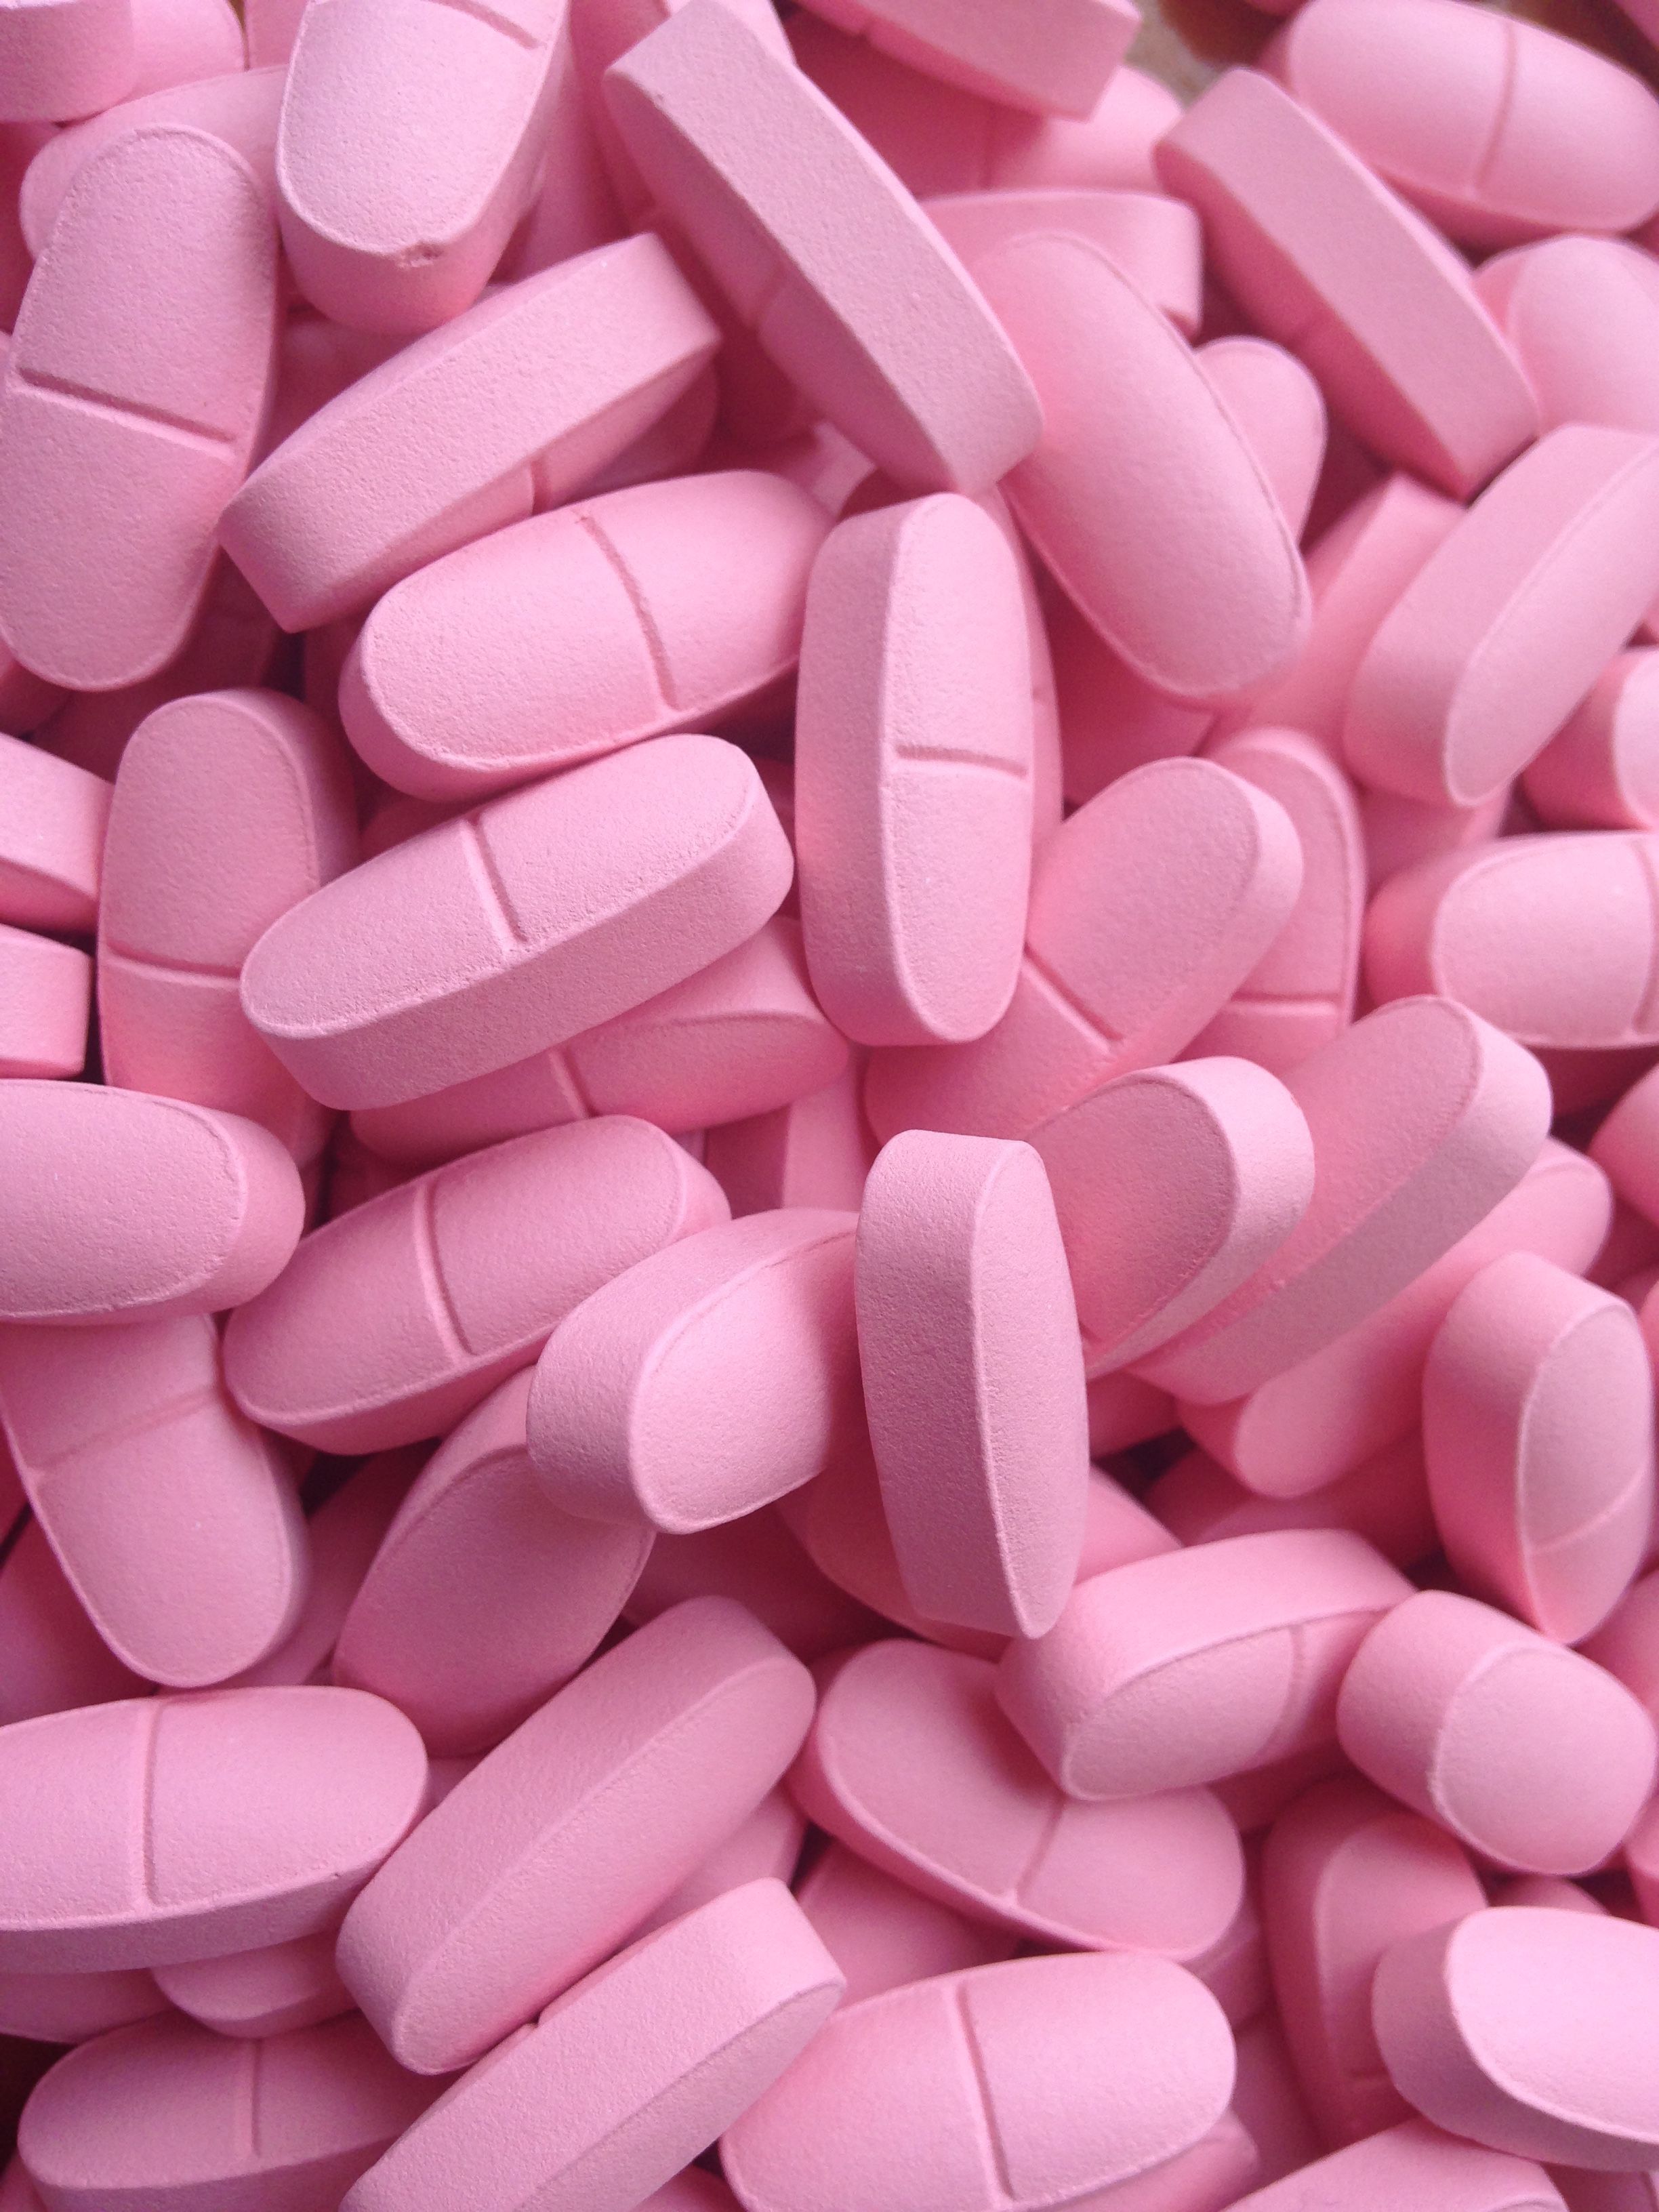 A pile of pink oval tablets - 